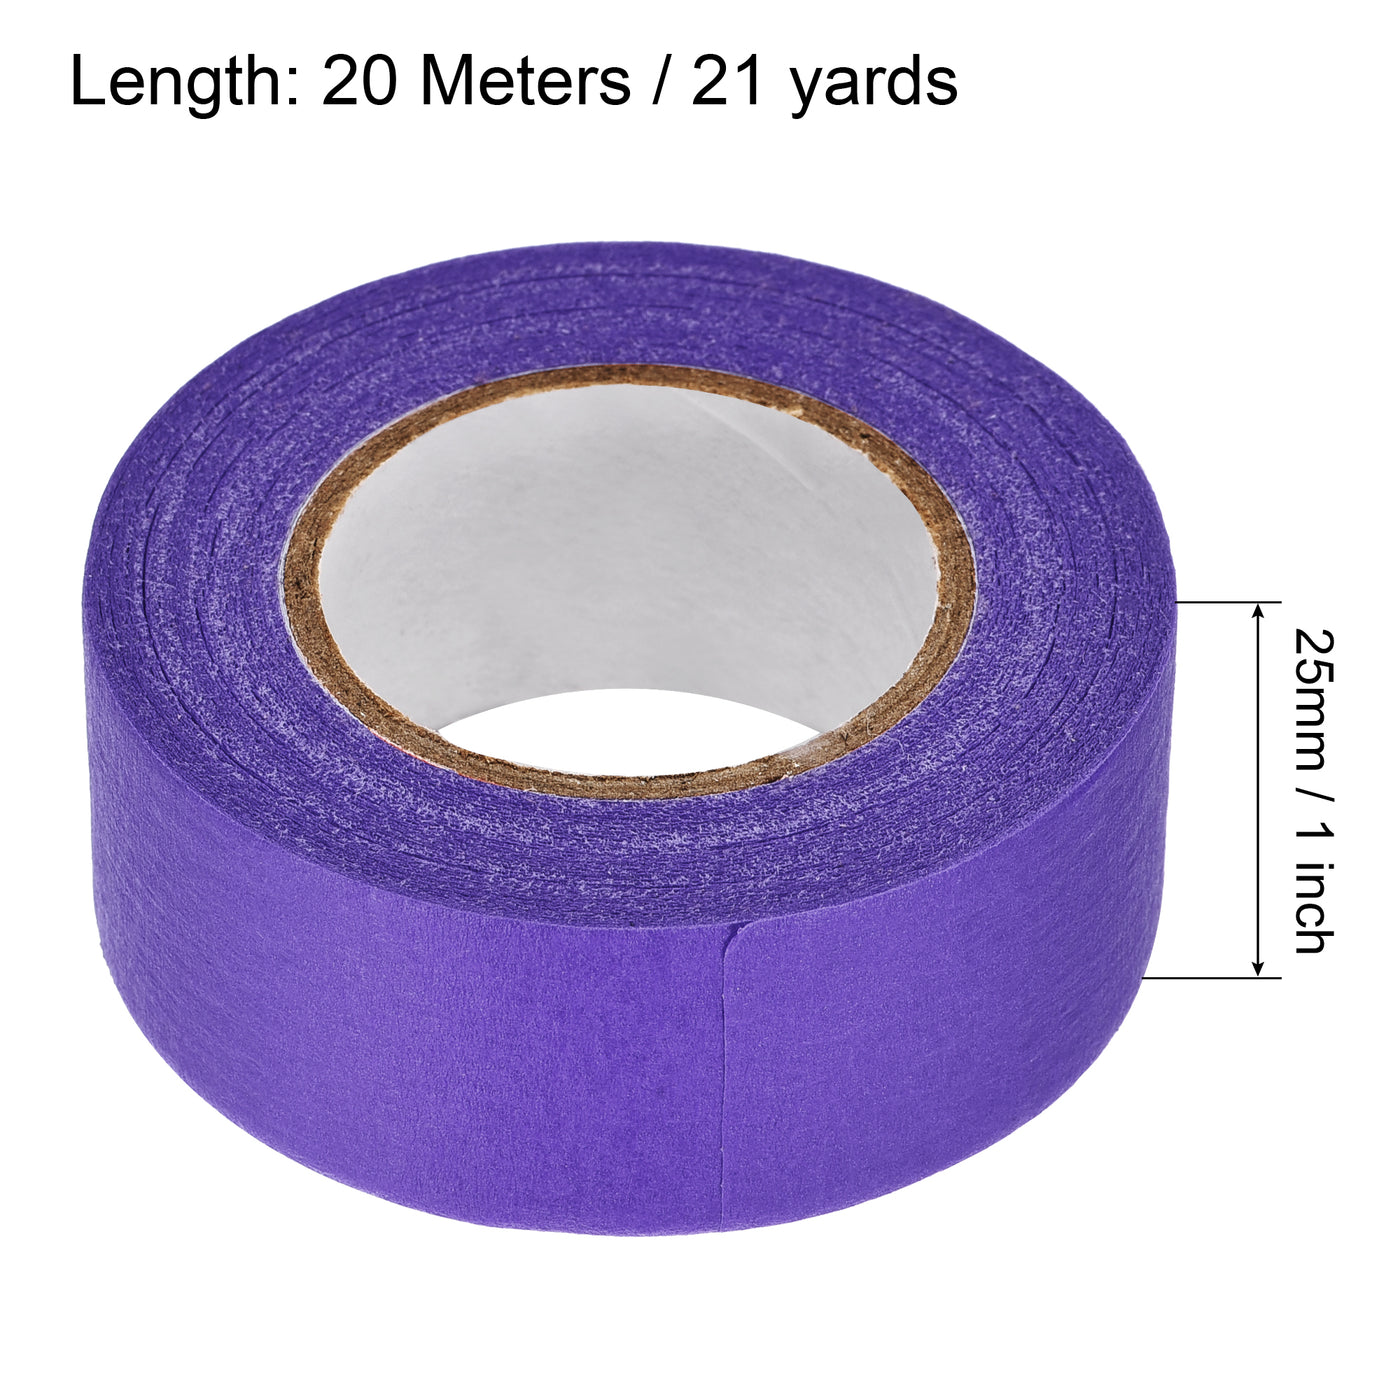 uxcell Uxcell 3Pcs 25mm 1 inch Wide 20m 21 Yards Masking Tape Painters Tape Rolls Purple